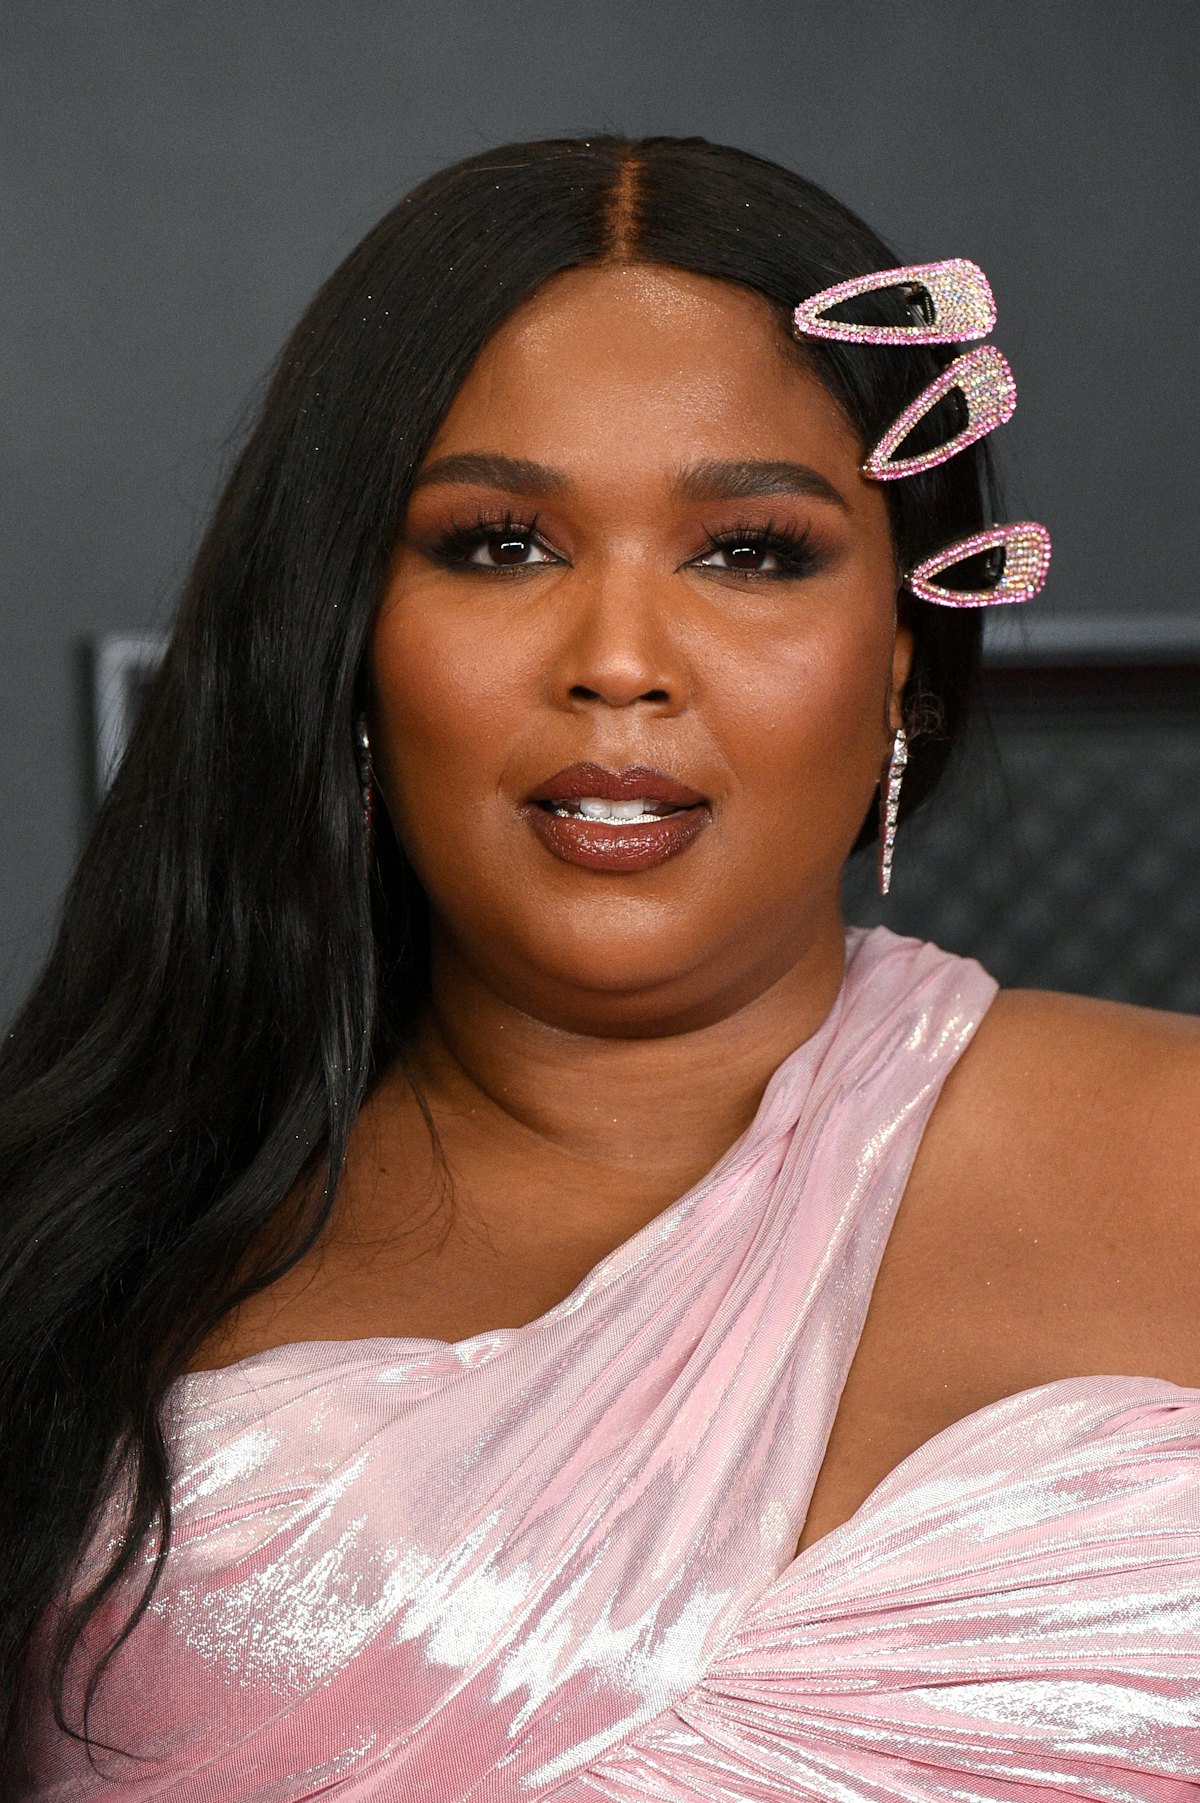 Lizzo Bleached Her Eyebrows To Match Her Short Blonde Hair